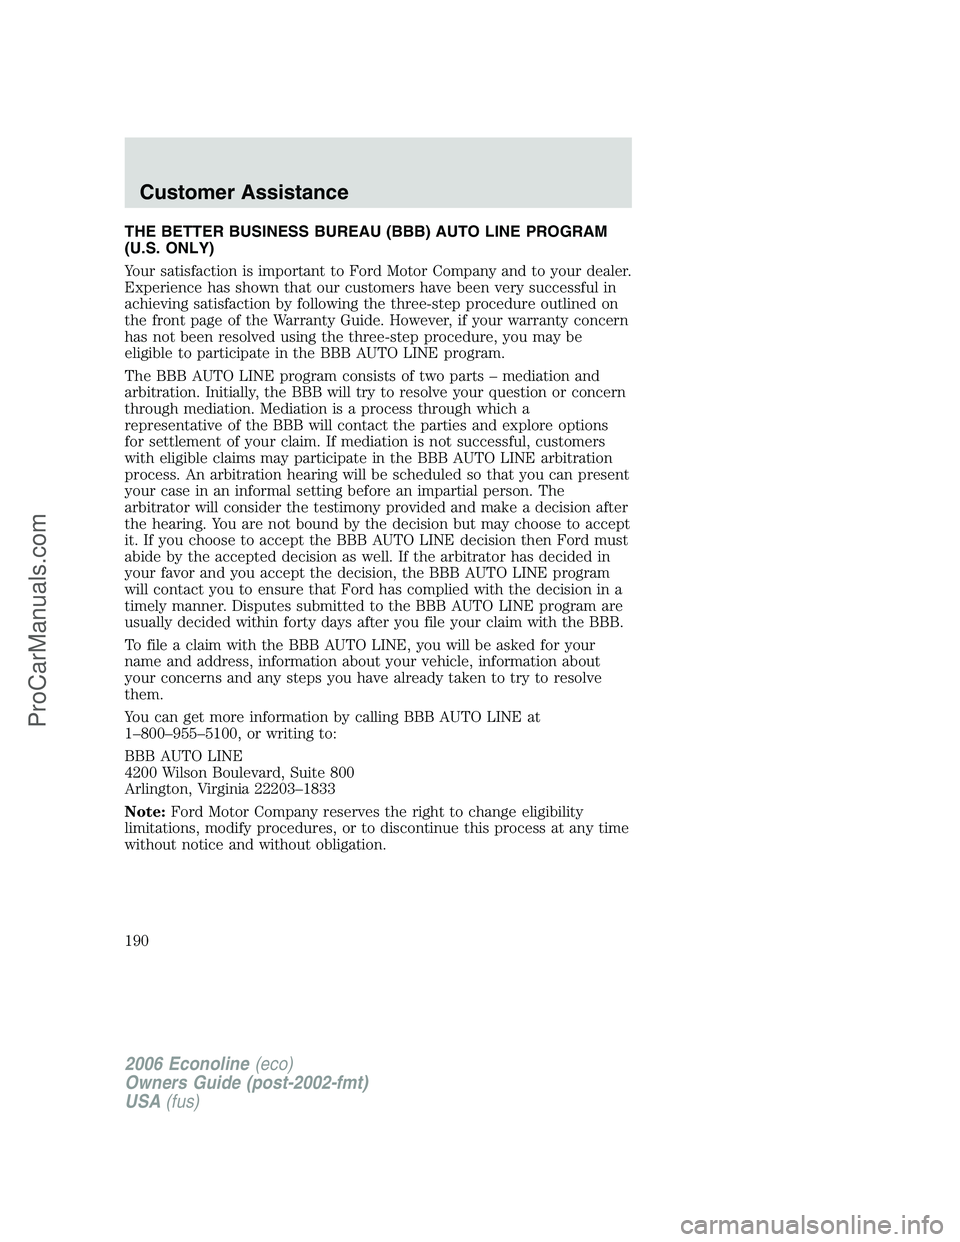 FORD E-150 2006  Owners Manual THE BETTER BUSINESS BUREAU (BBB) AUTO LINE PROGRAM
(U.S. ONLY)
Your satisfaction is important to Ford Motor Company and to your dealer.
Experience has shown that our customers have been very successfu